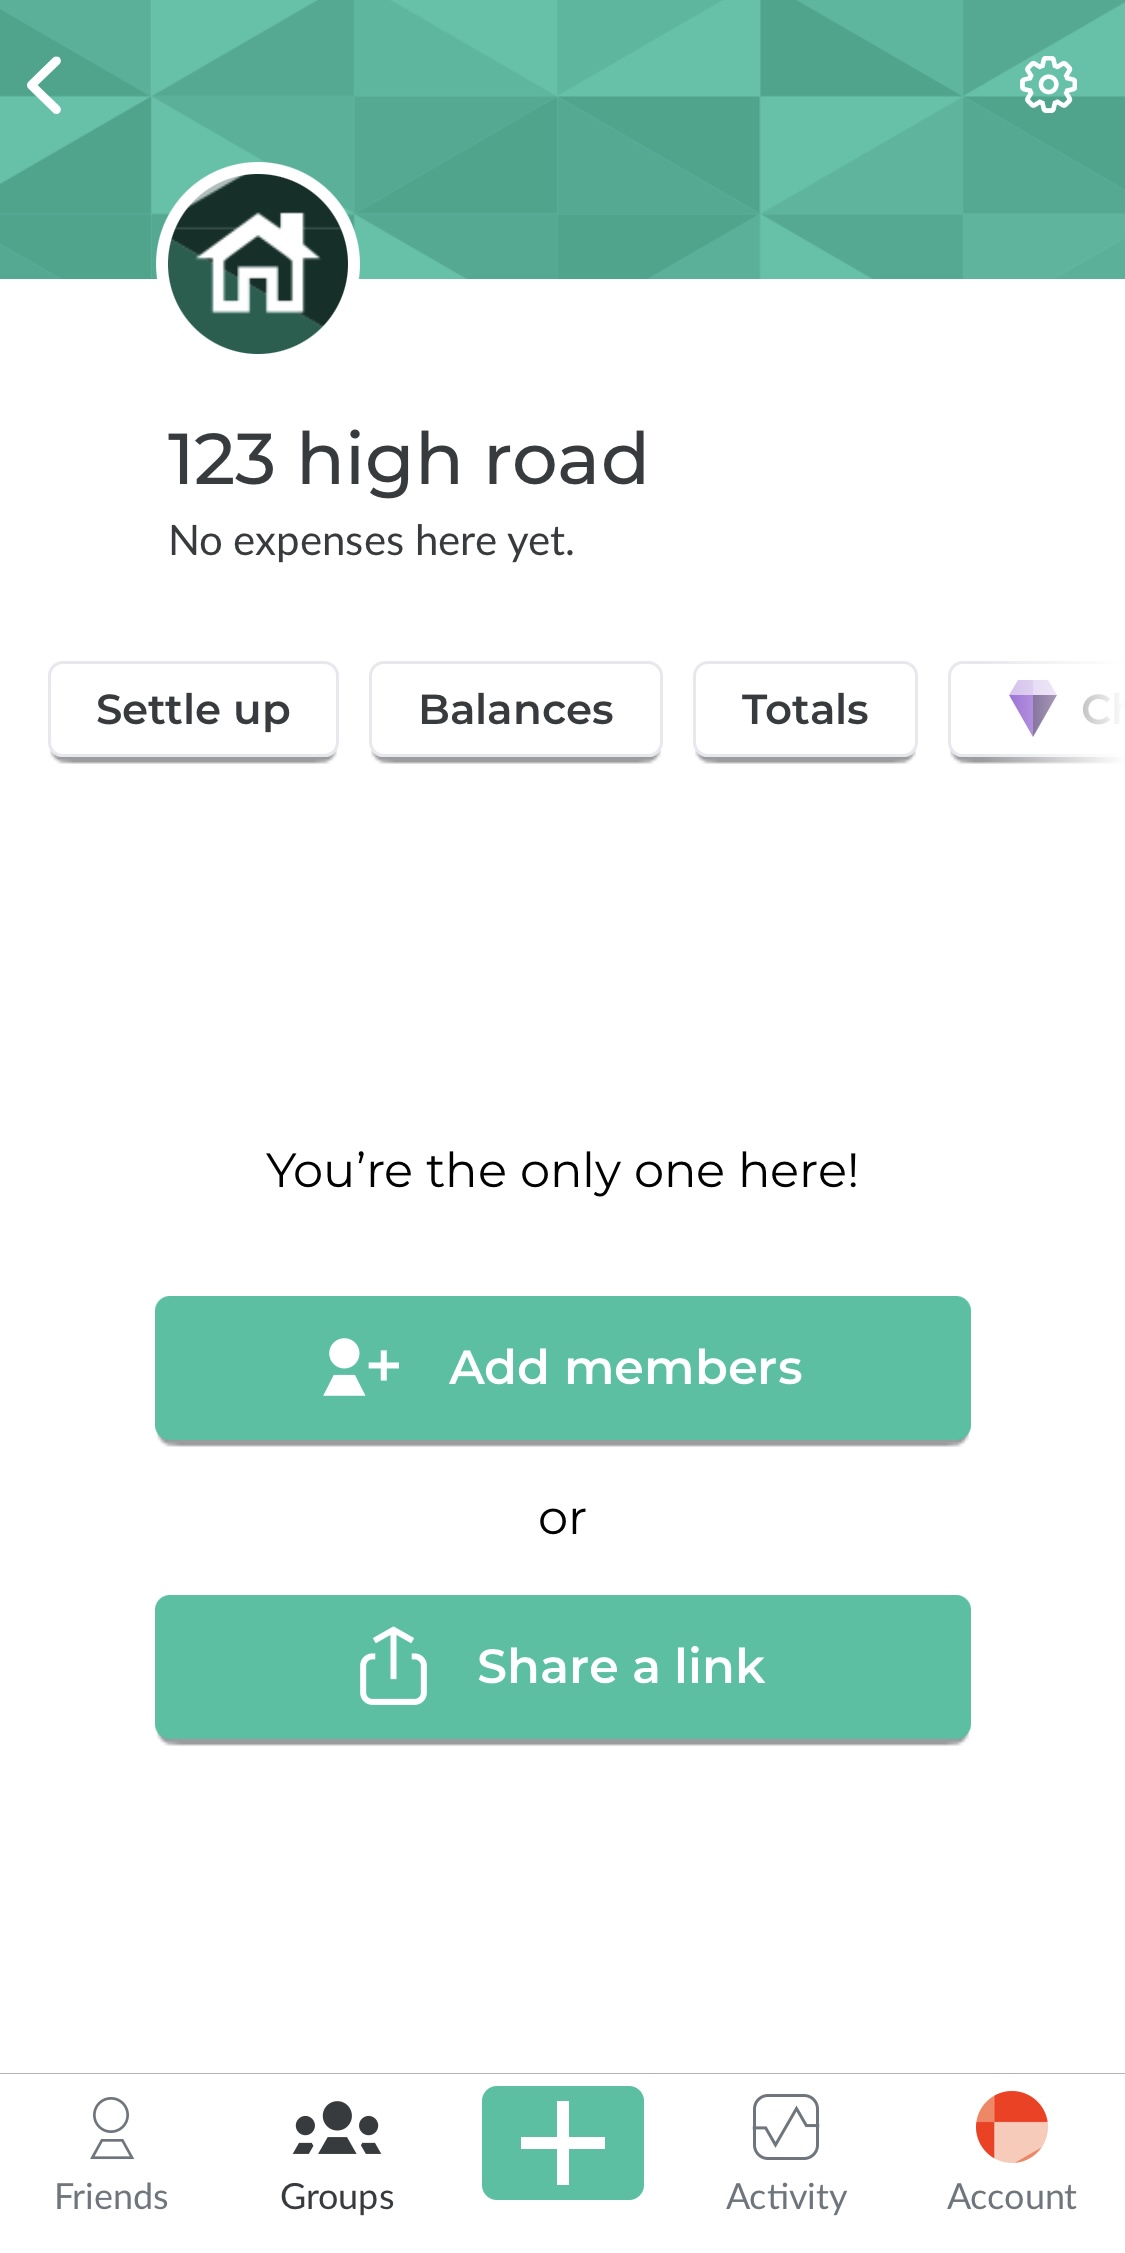 This free bill-splitting app has made settling my shared expenses